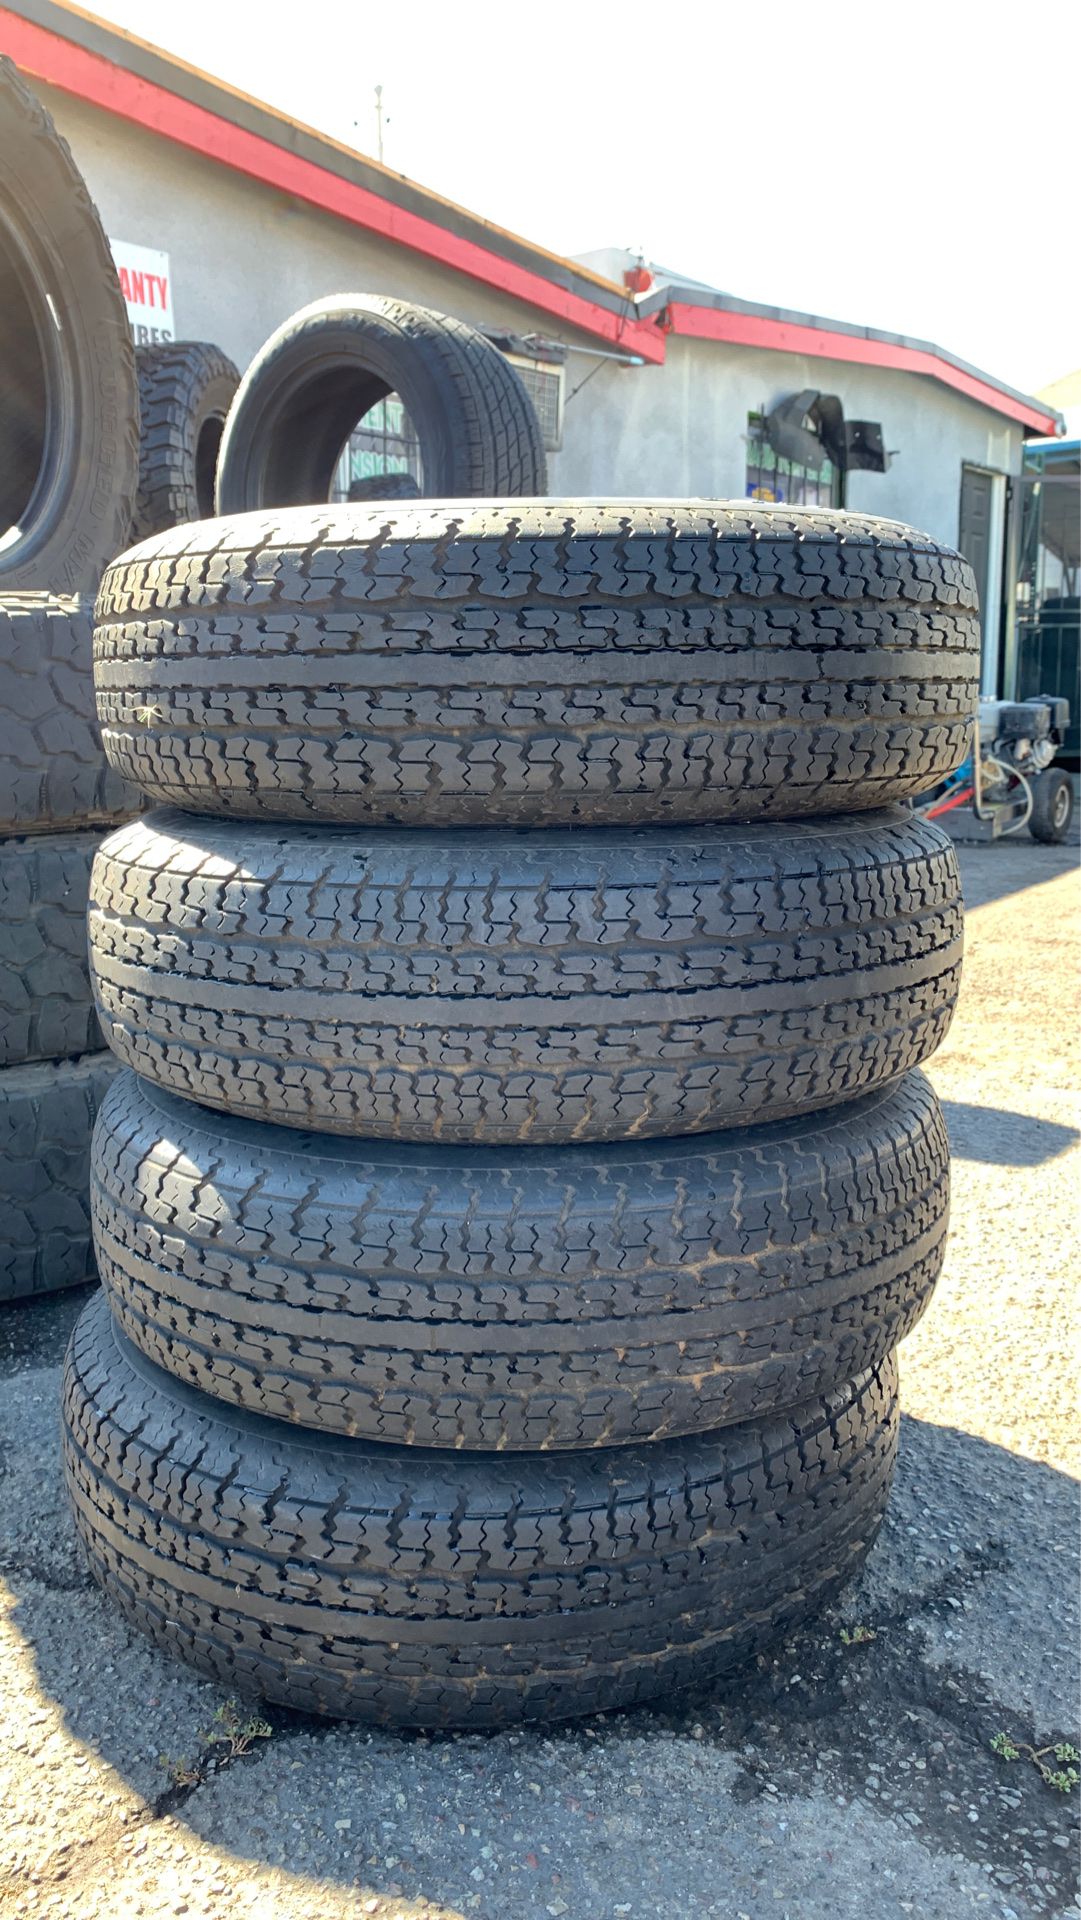 (4) 205/75/14 GOOD YEAR TRAILER TIRES GOOD CONDITION